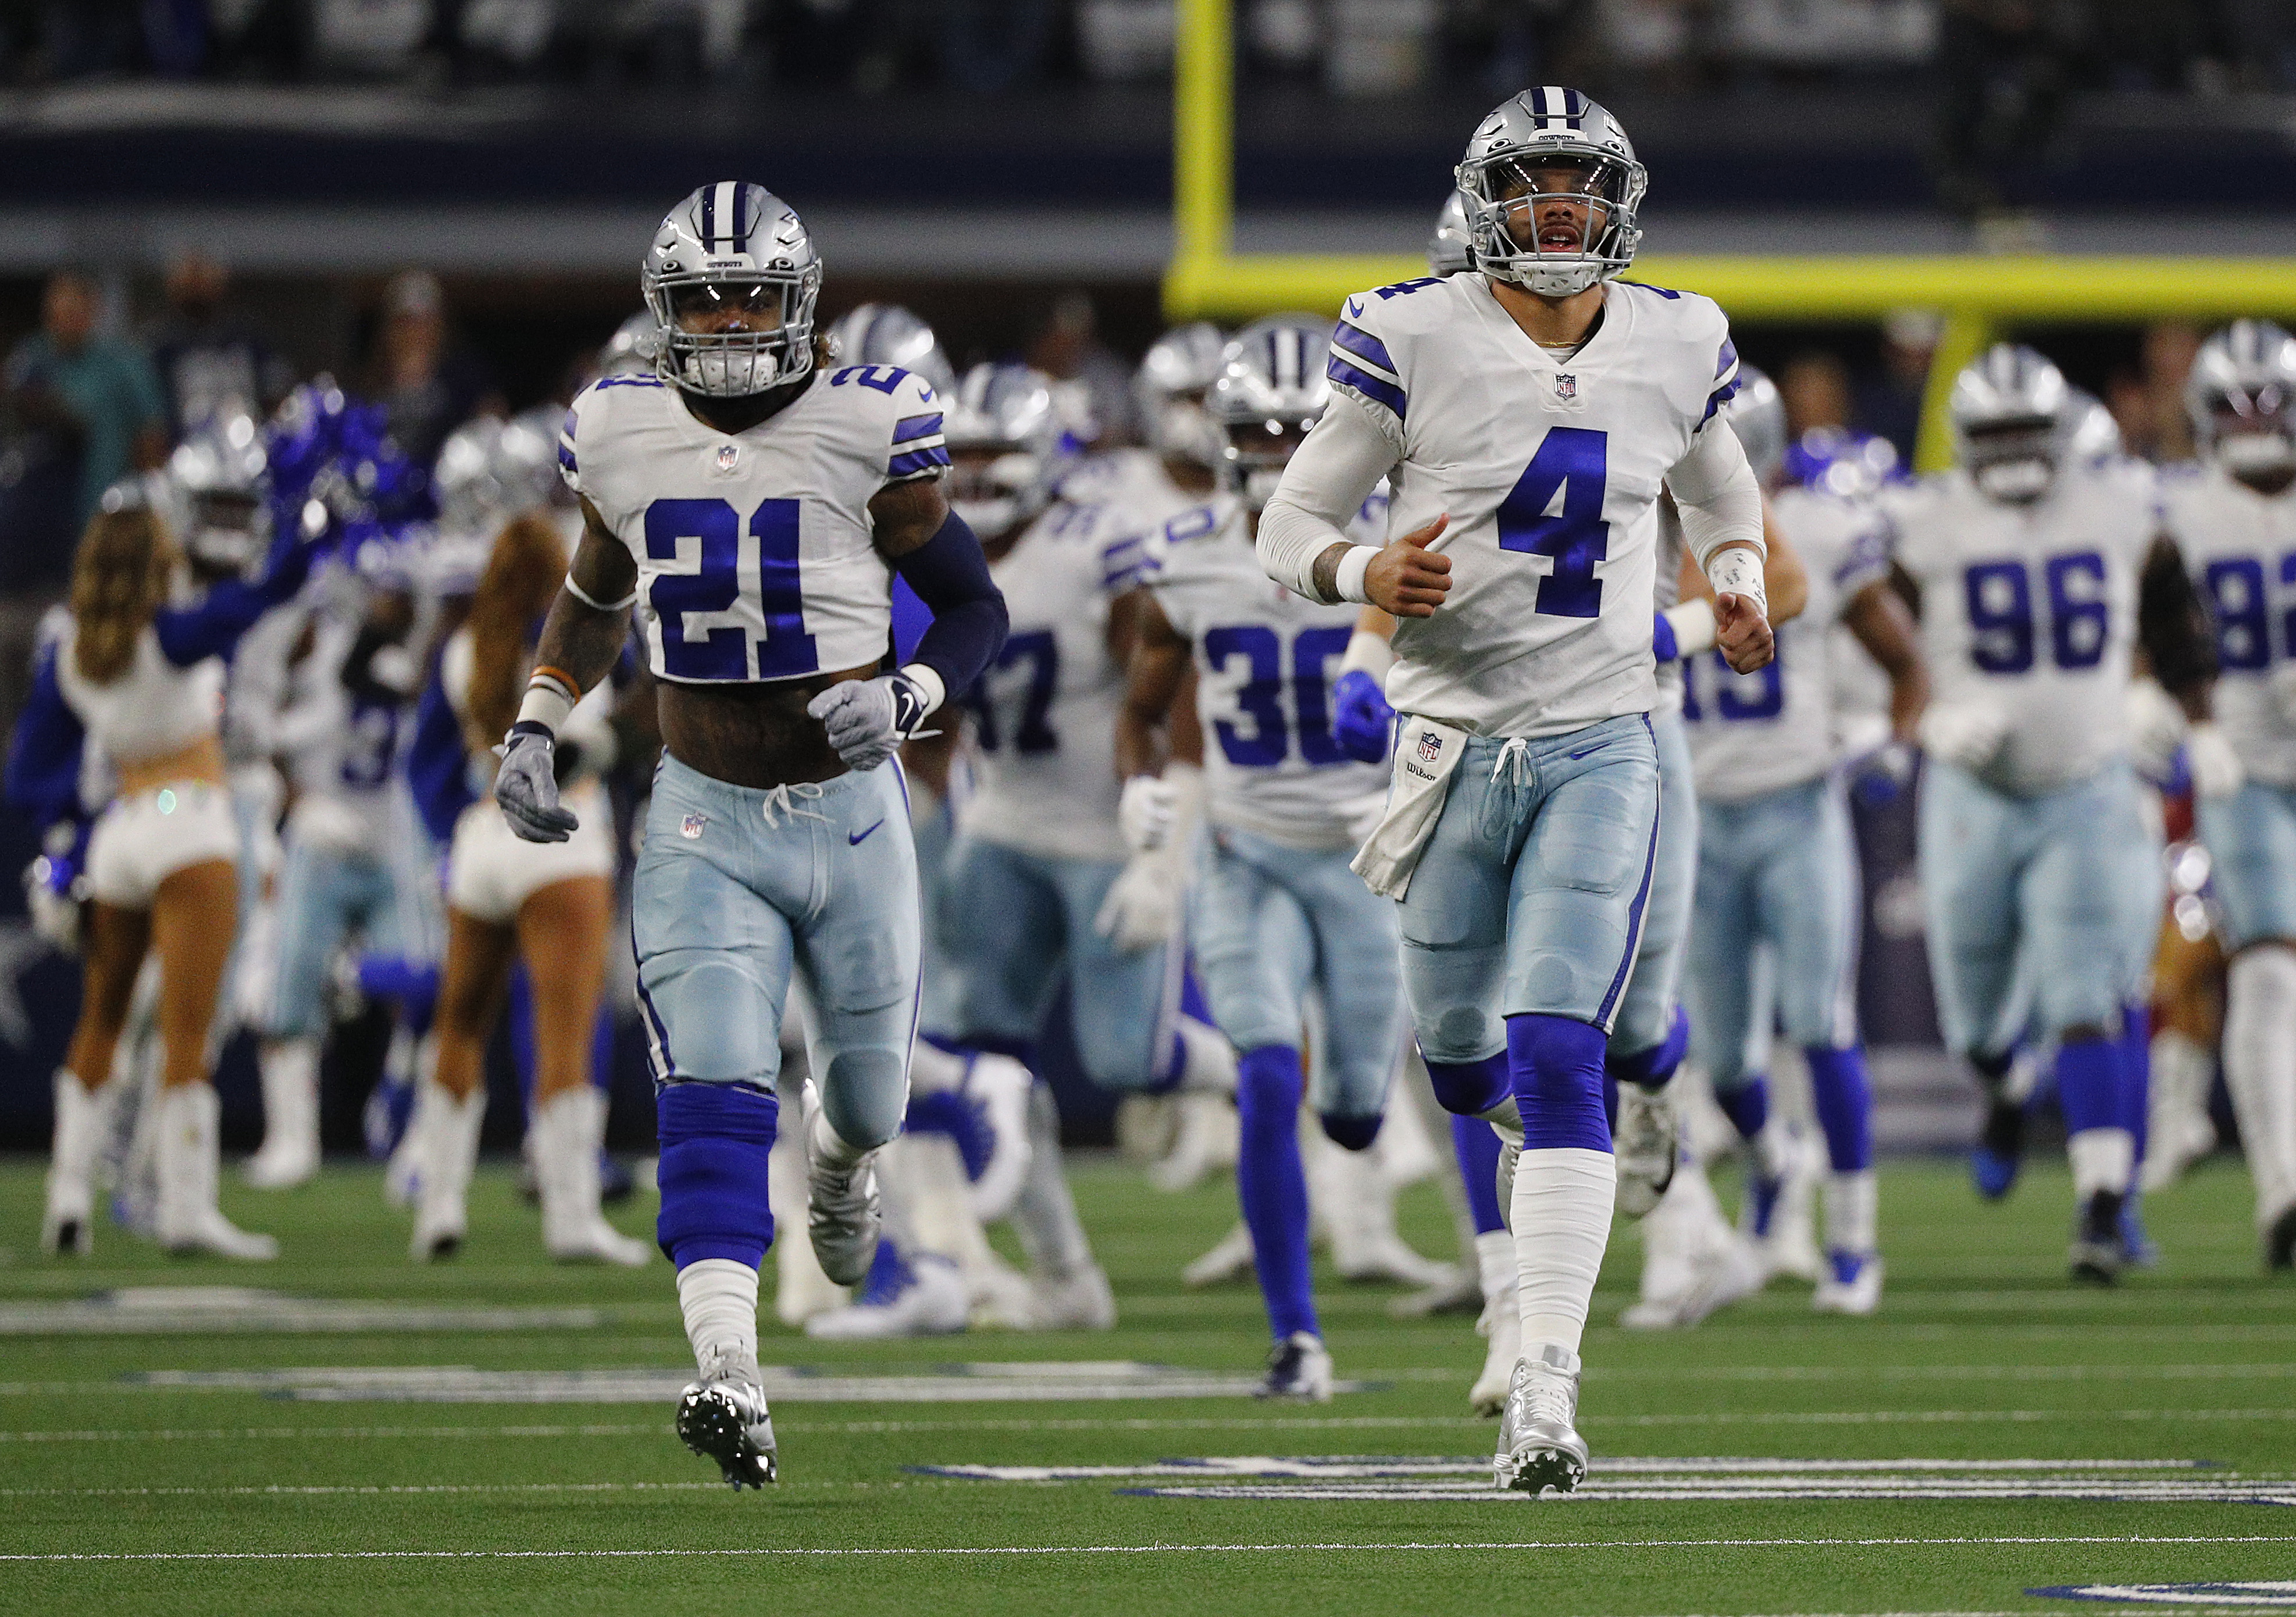 The Dallas Cowboys can stay in the hunt for the NFC top seed with a Week 17 win